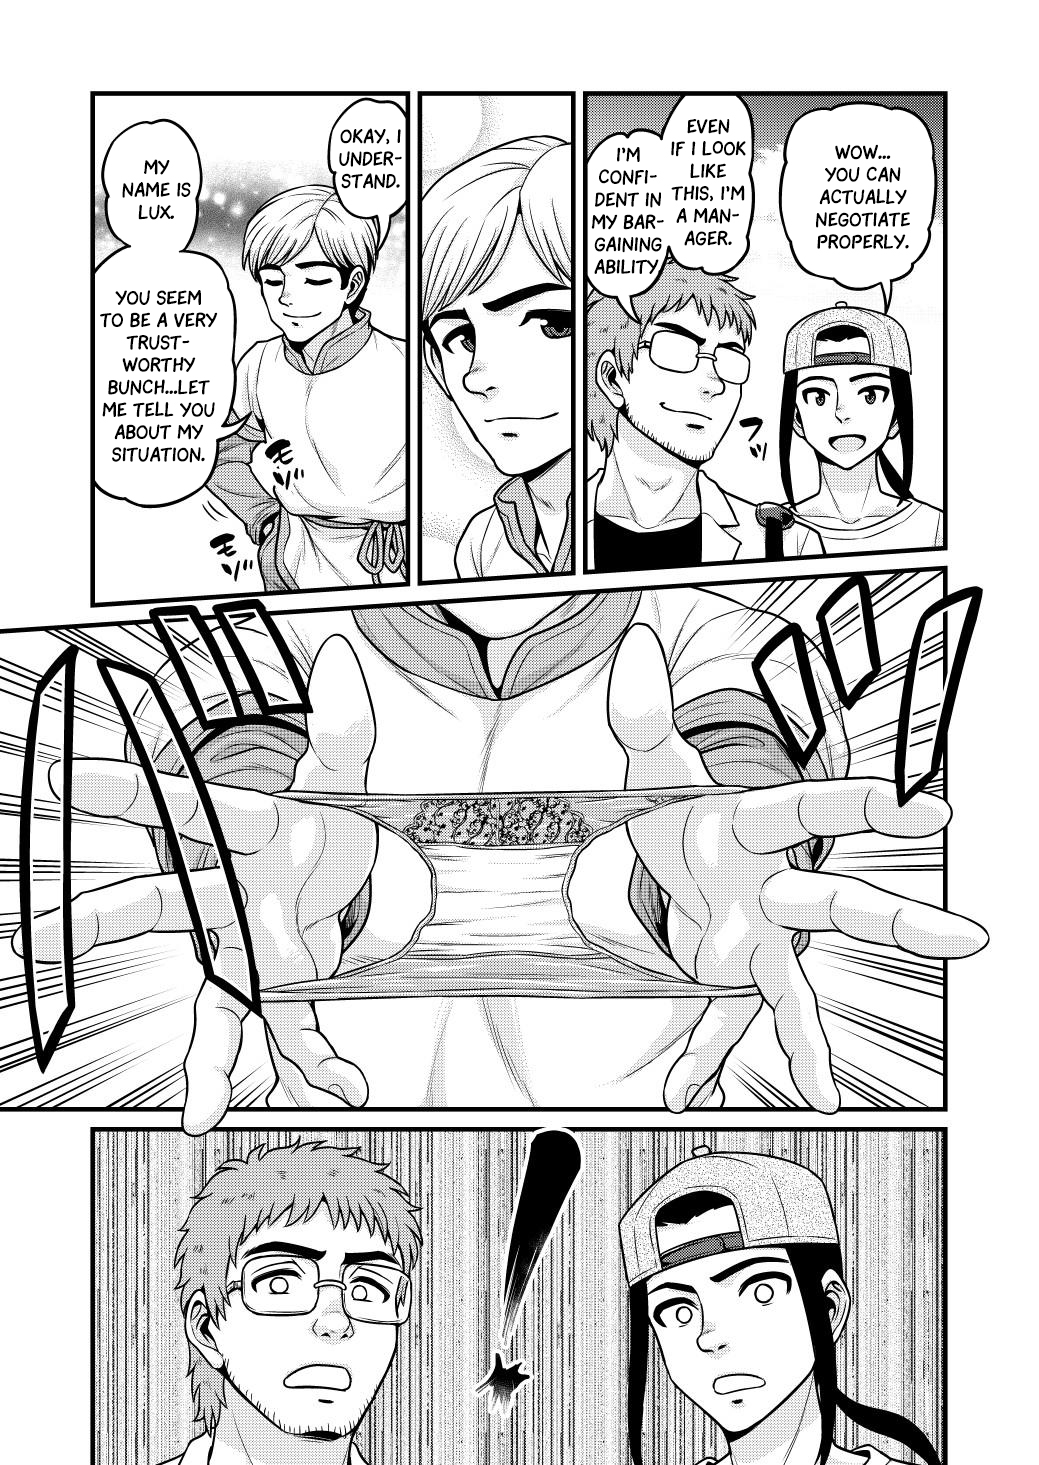 Filming Adult Videos in Another World - Chapter 2 Page 12